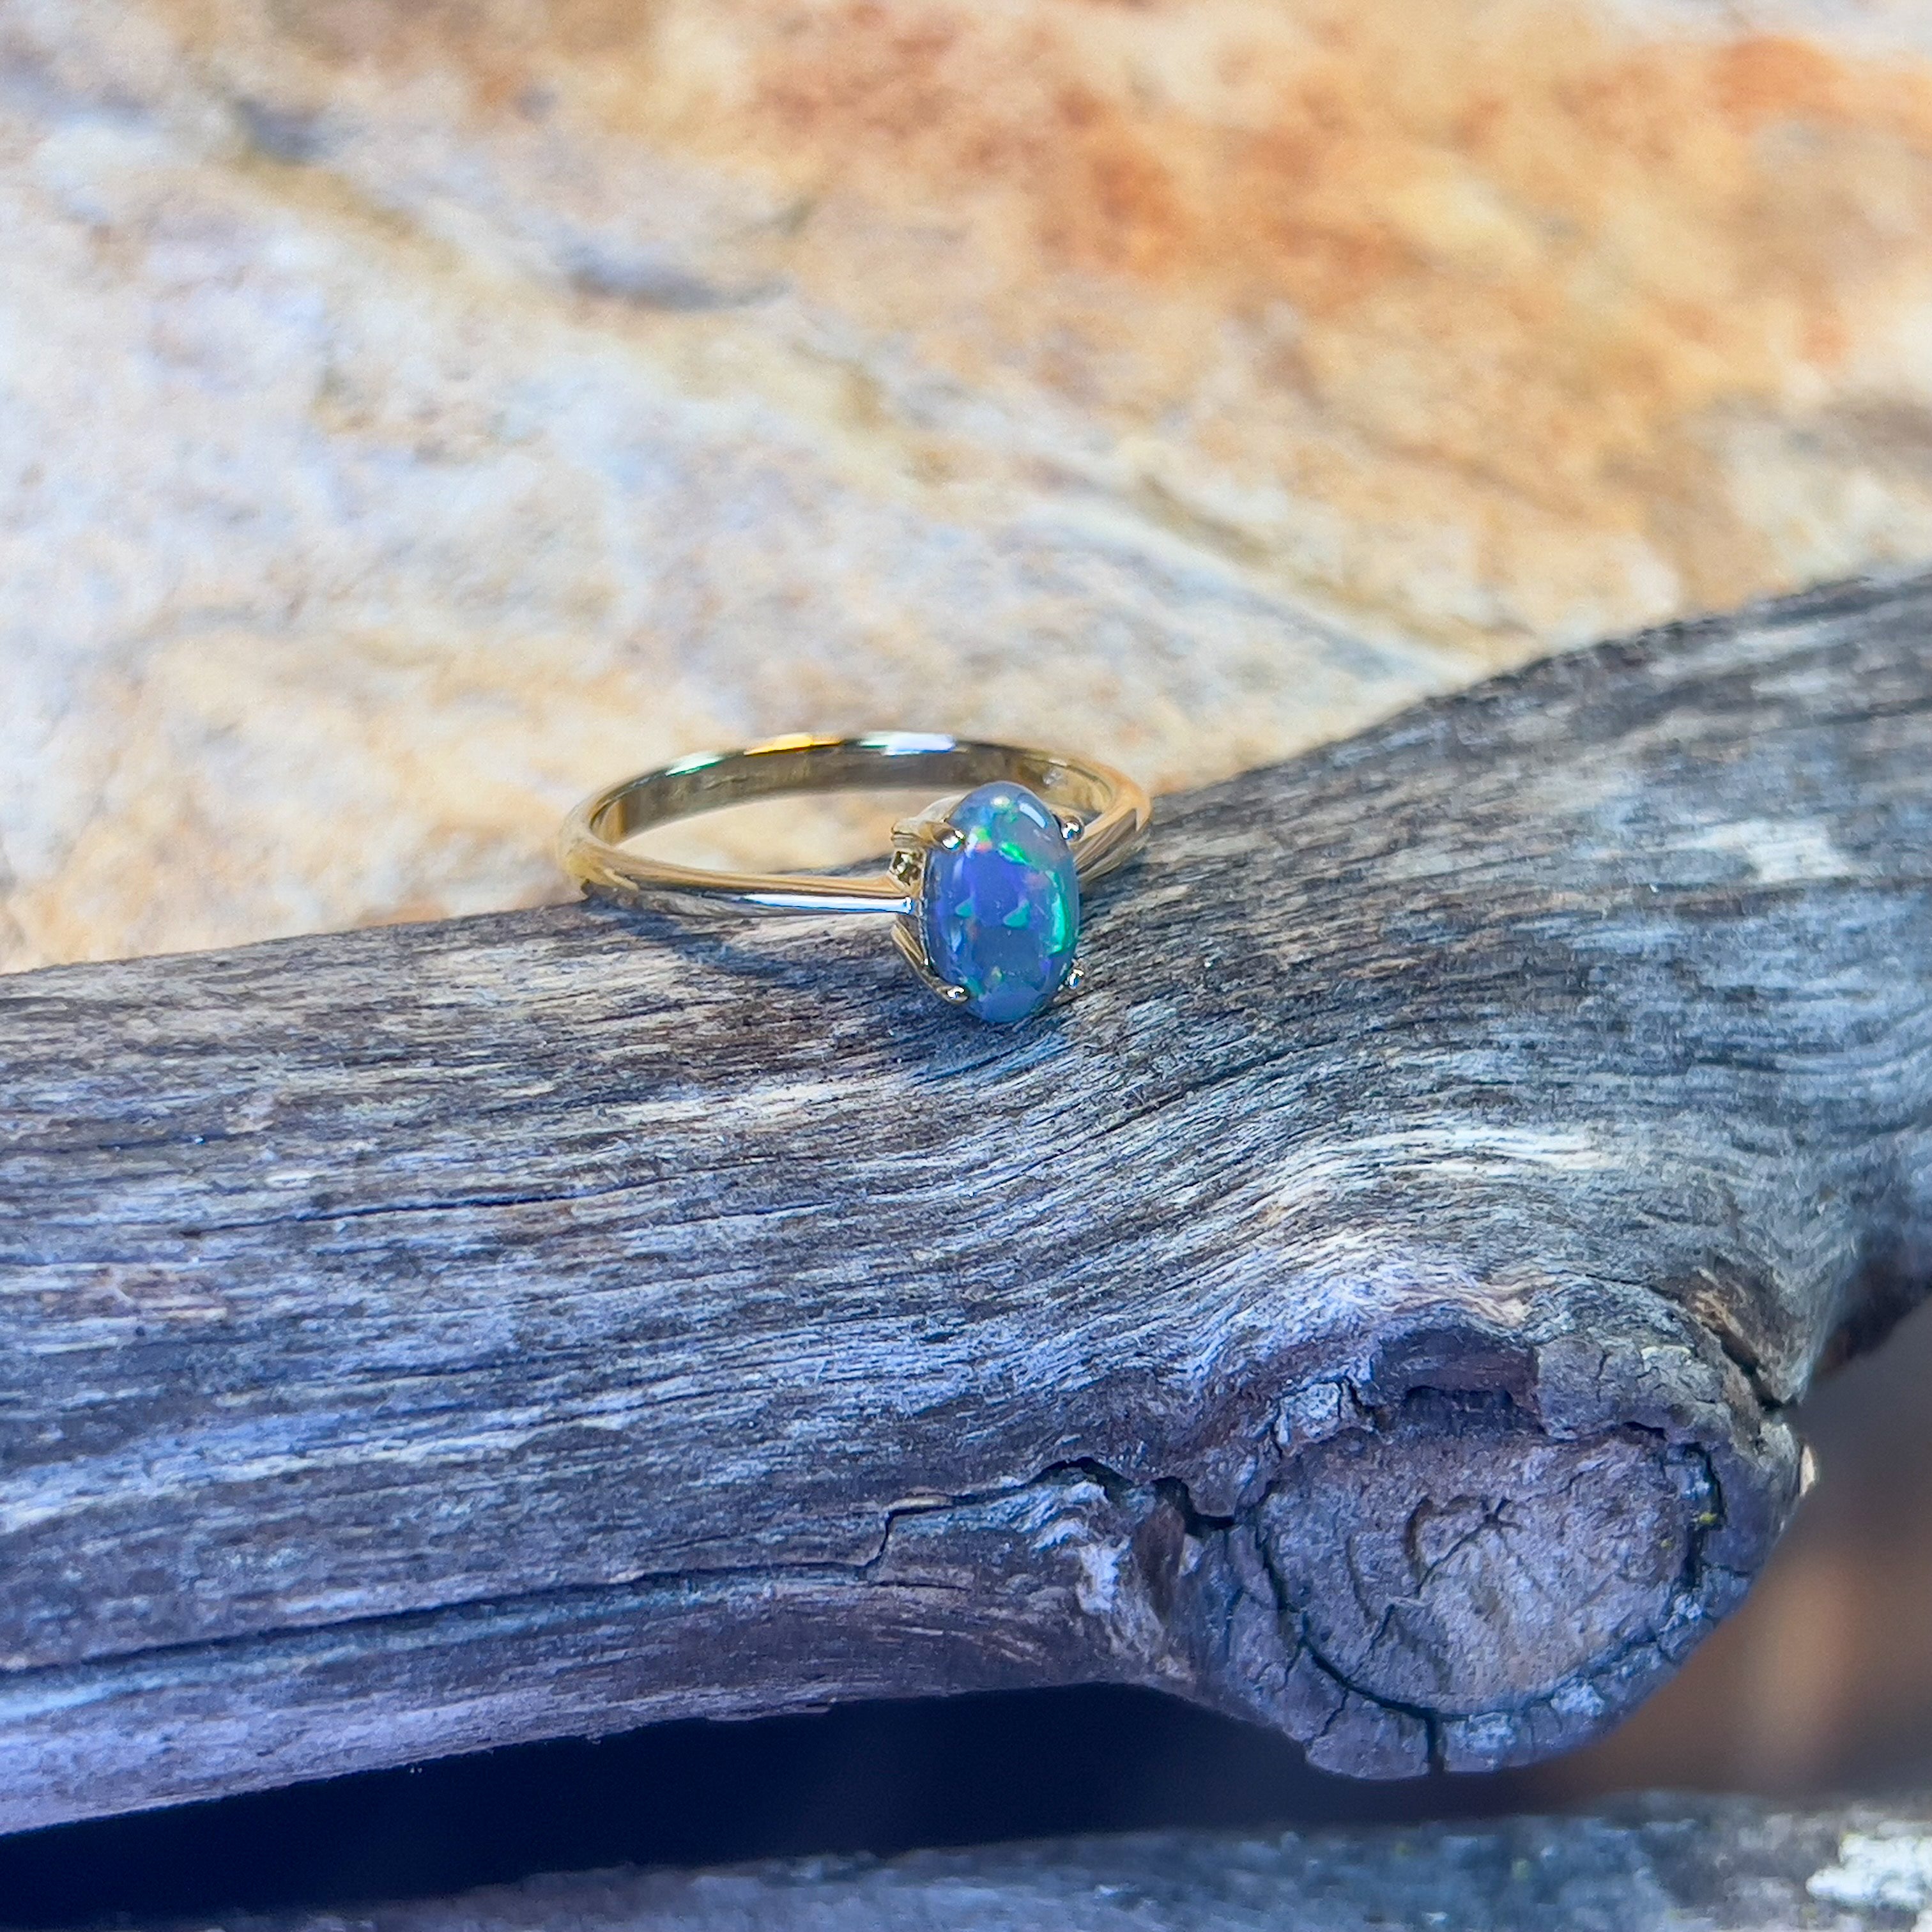 18kt Yellow Gold solitaire ring set with one 0.65ct Black Opal - Masterpiece Jewellery Opal & Gems Sydney Australia | Online Shop